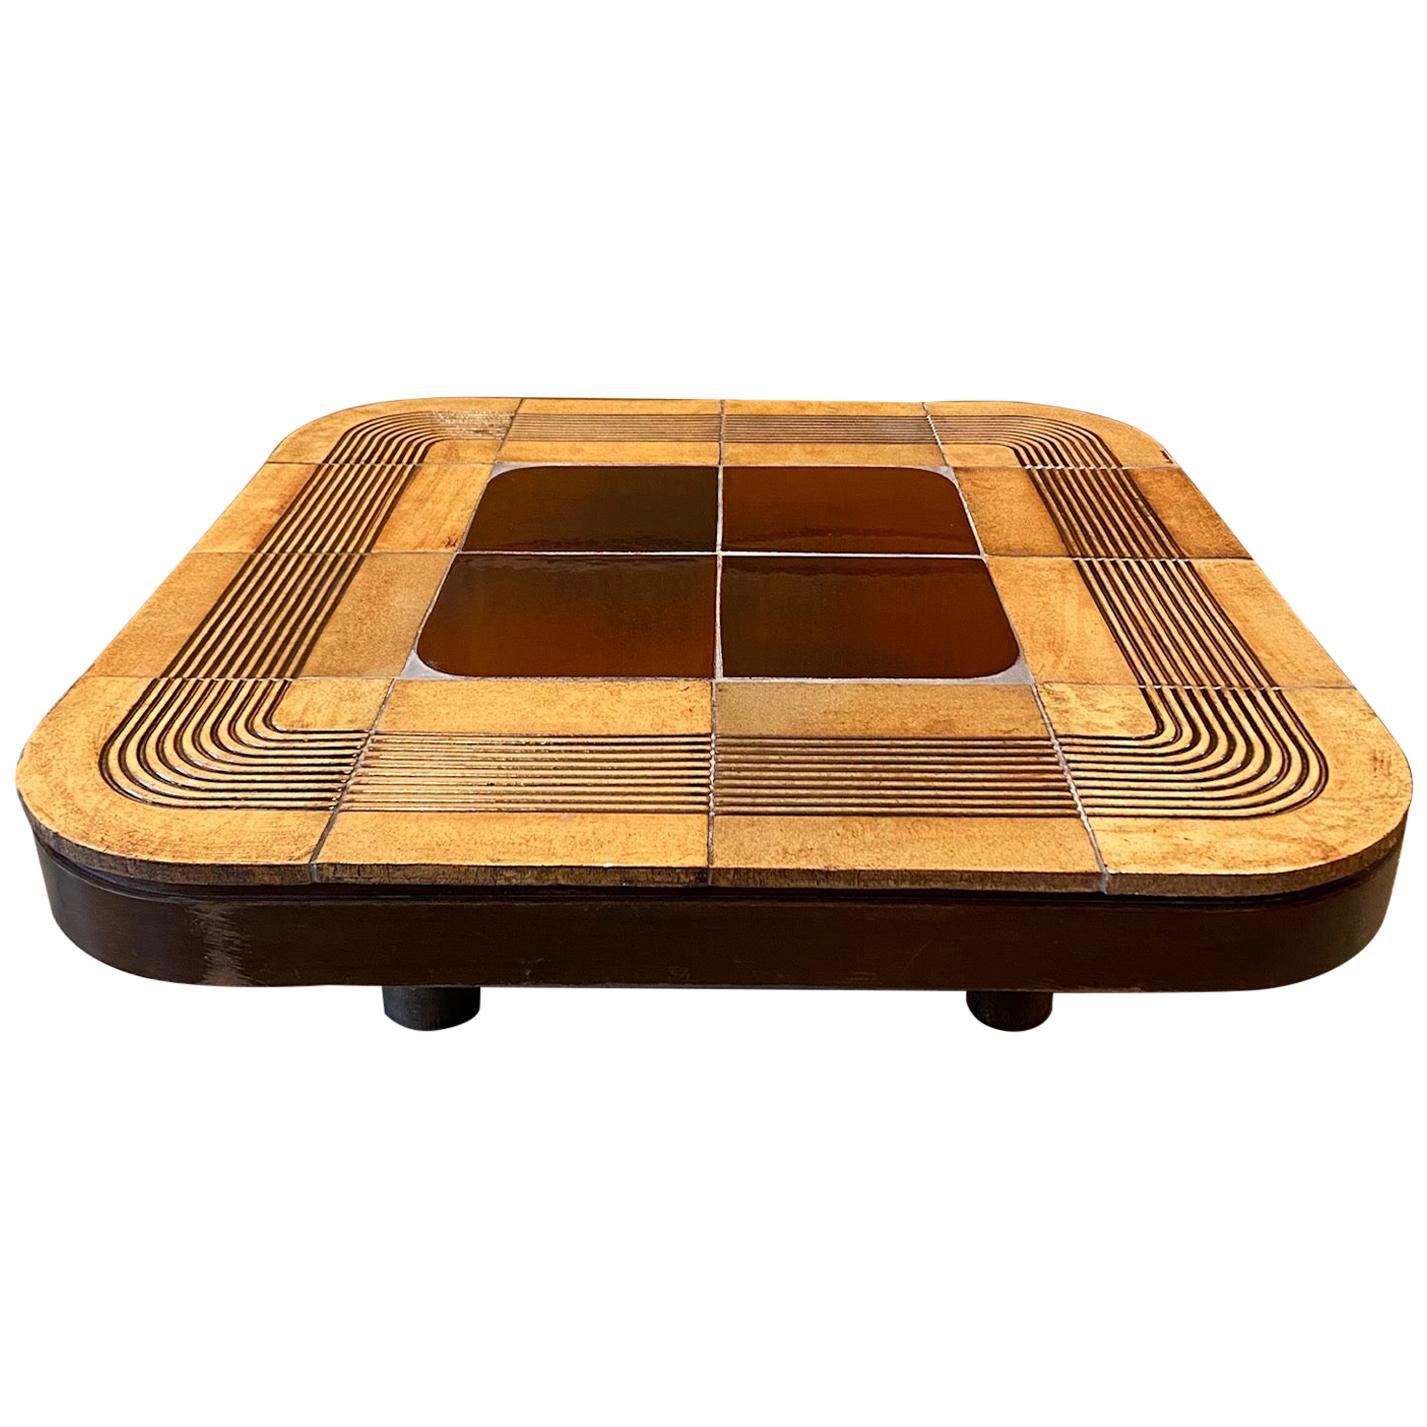 Ceramic Coffee Table "Mambo", Roger Capron, France, Early 1970s